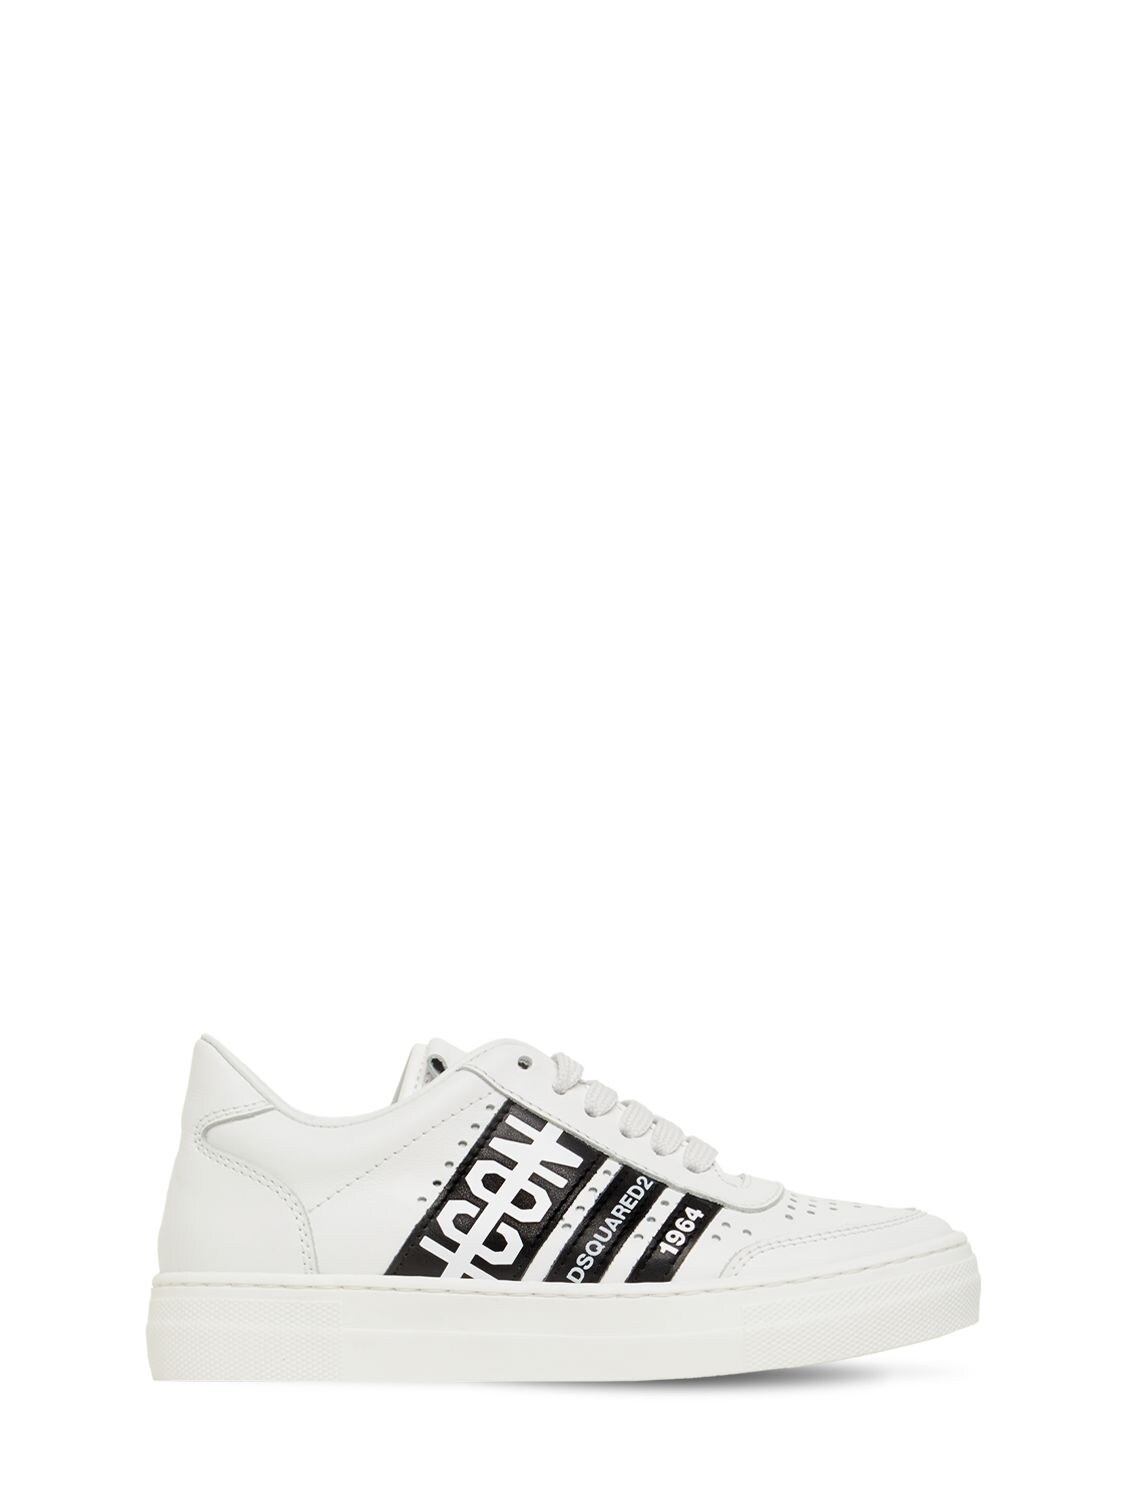 Dsquared2 - Icon print leather lace-up sneakers - White/Black ...